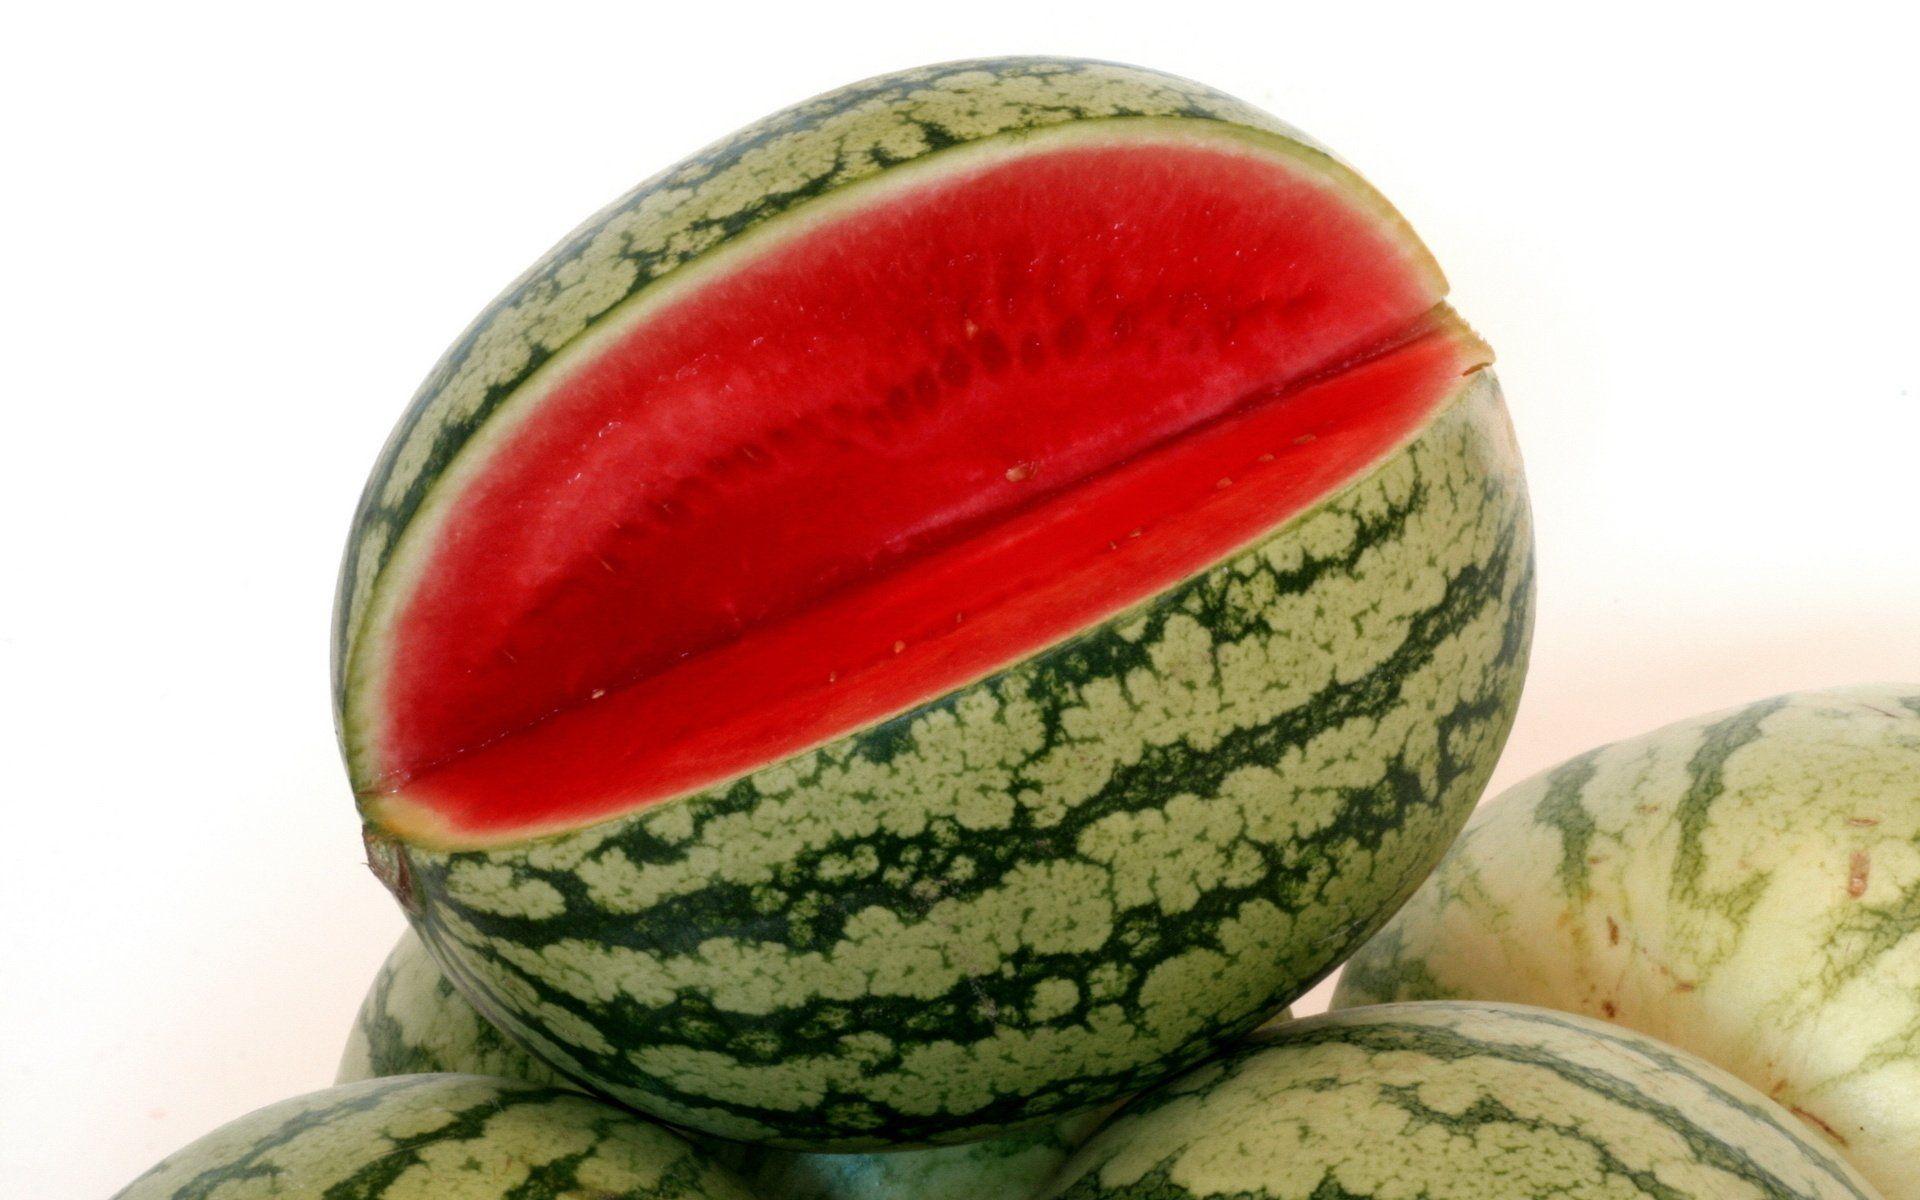 watermelon pictures to print